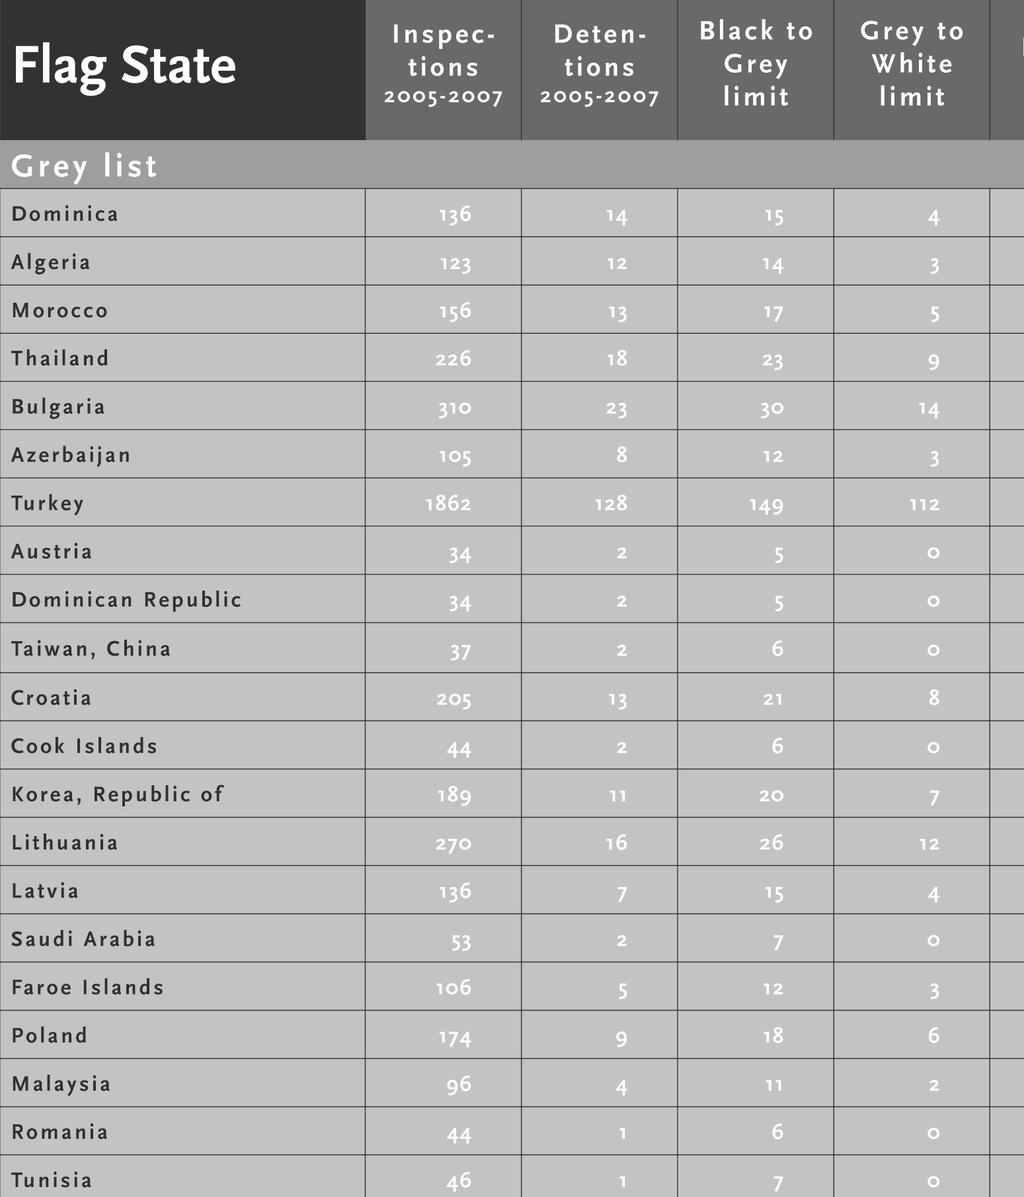 grey list Flag State Inspections 2005-2007 Detentions 2005-2007 Black to Grey limit Grey to White limit Excess Factor Grey list Dominica 136 14 15 4 0,92 Algeria 123 12 14 3 0,83 Morocco 156 13 17 5